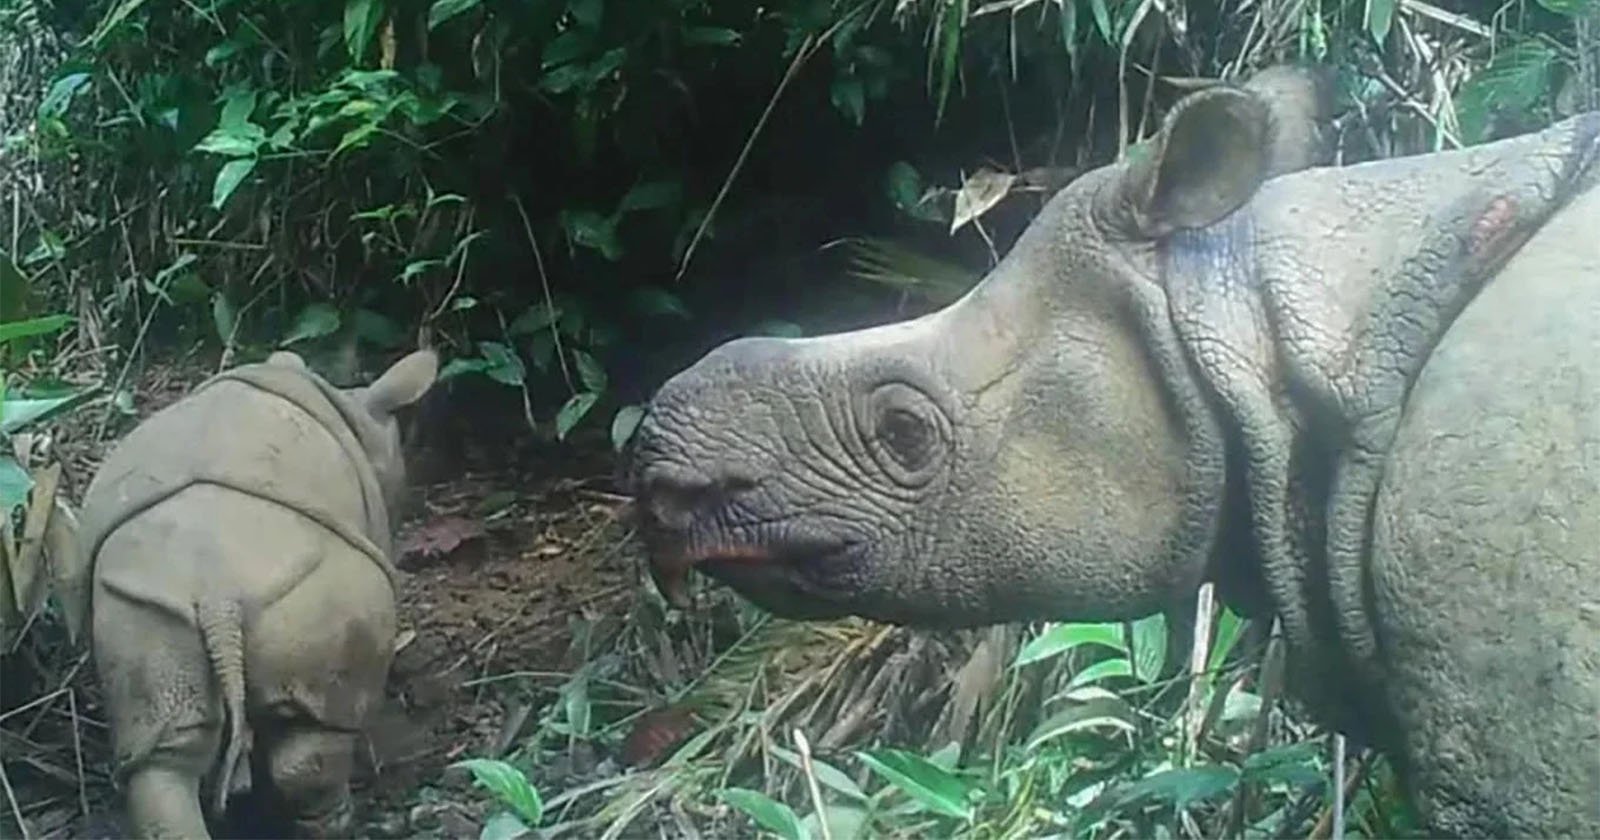 An adult sumatran rhinoceros and a calf are captured close-up by a camera trap in a dense jungle, highlighting the rich biodiversity and the need for conservation.